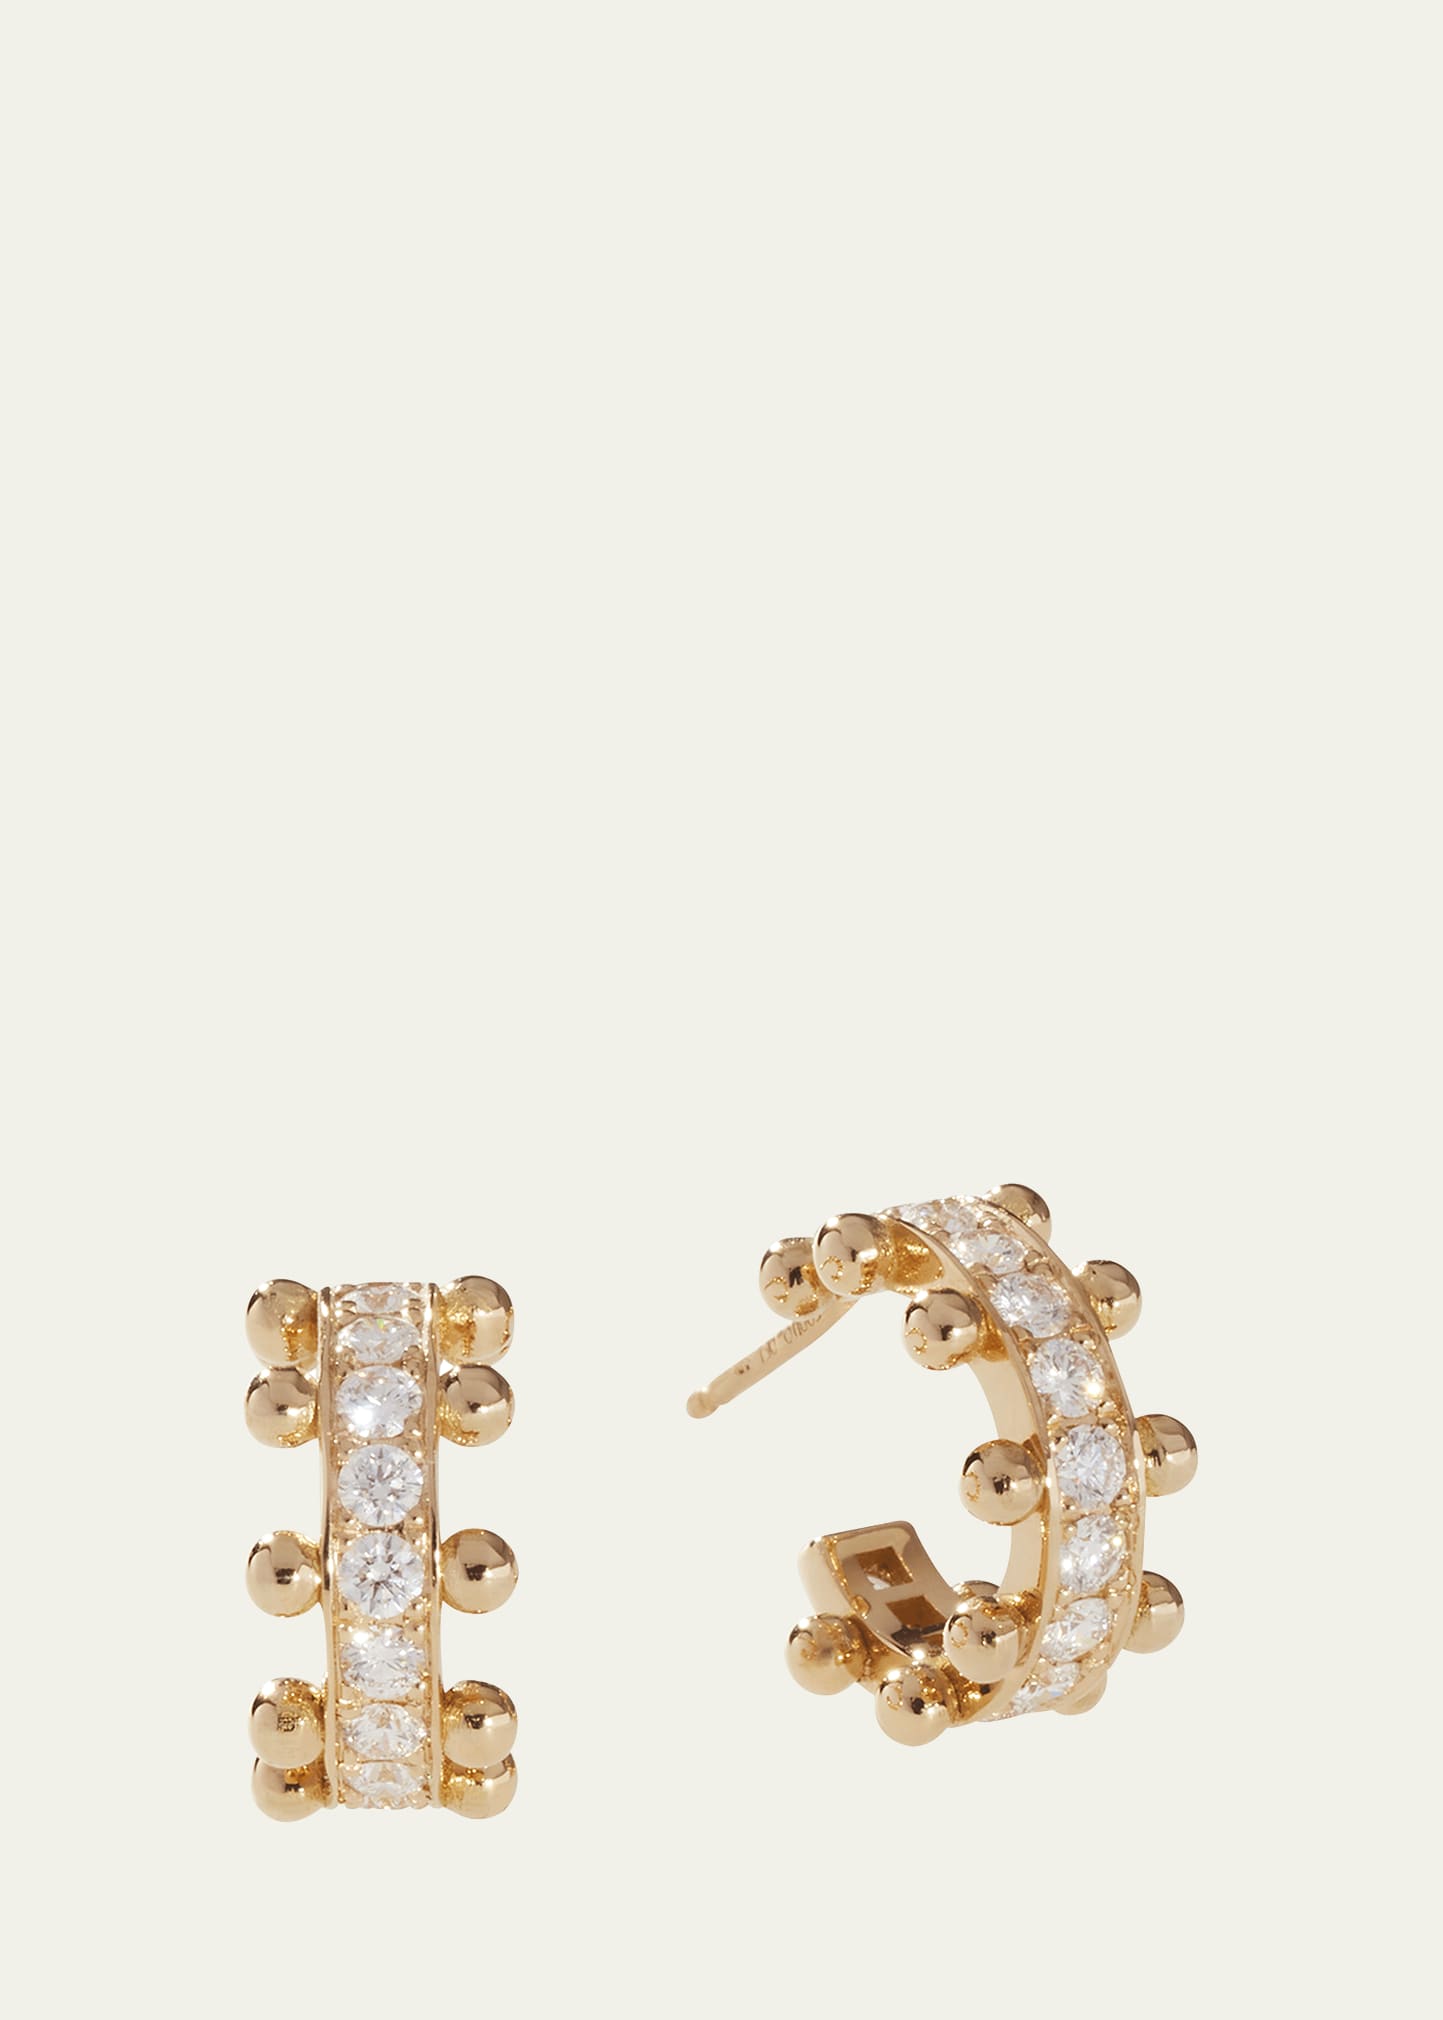 OSCAR MASSIN BEADED 18K RECYCLED YELLOW GOLD AND LAB GROWN DIAMOND SMALL HOOP EARRINGS